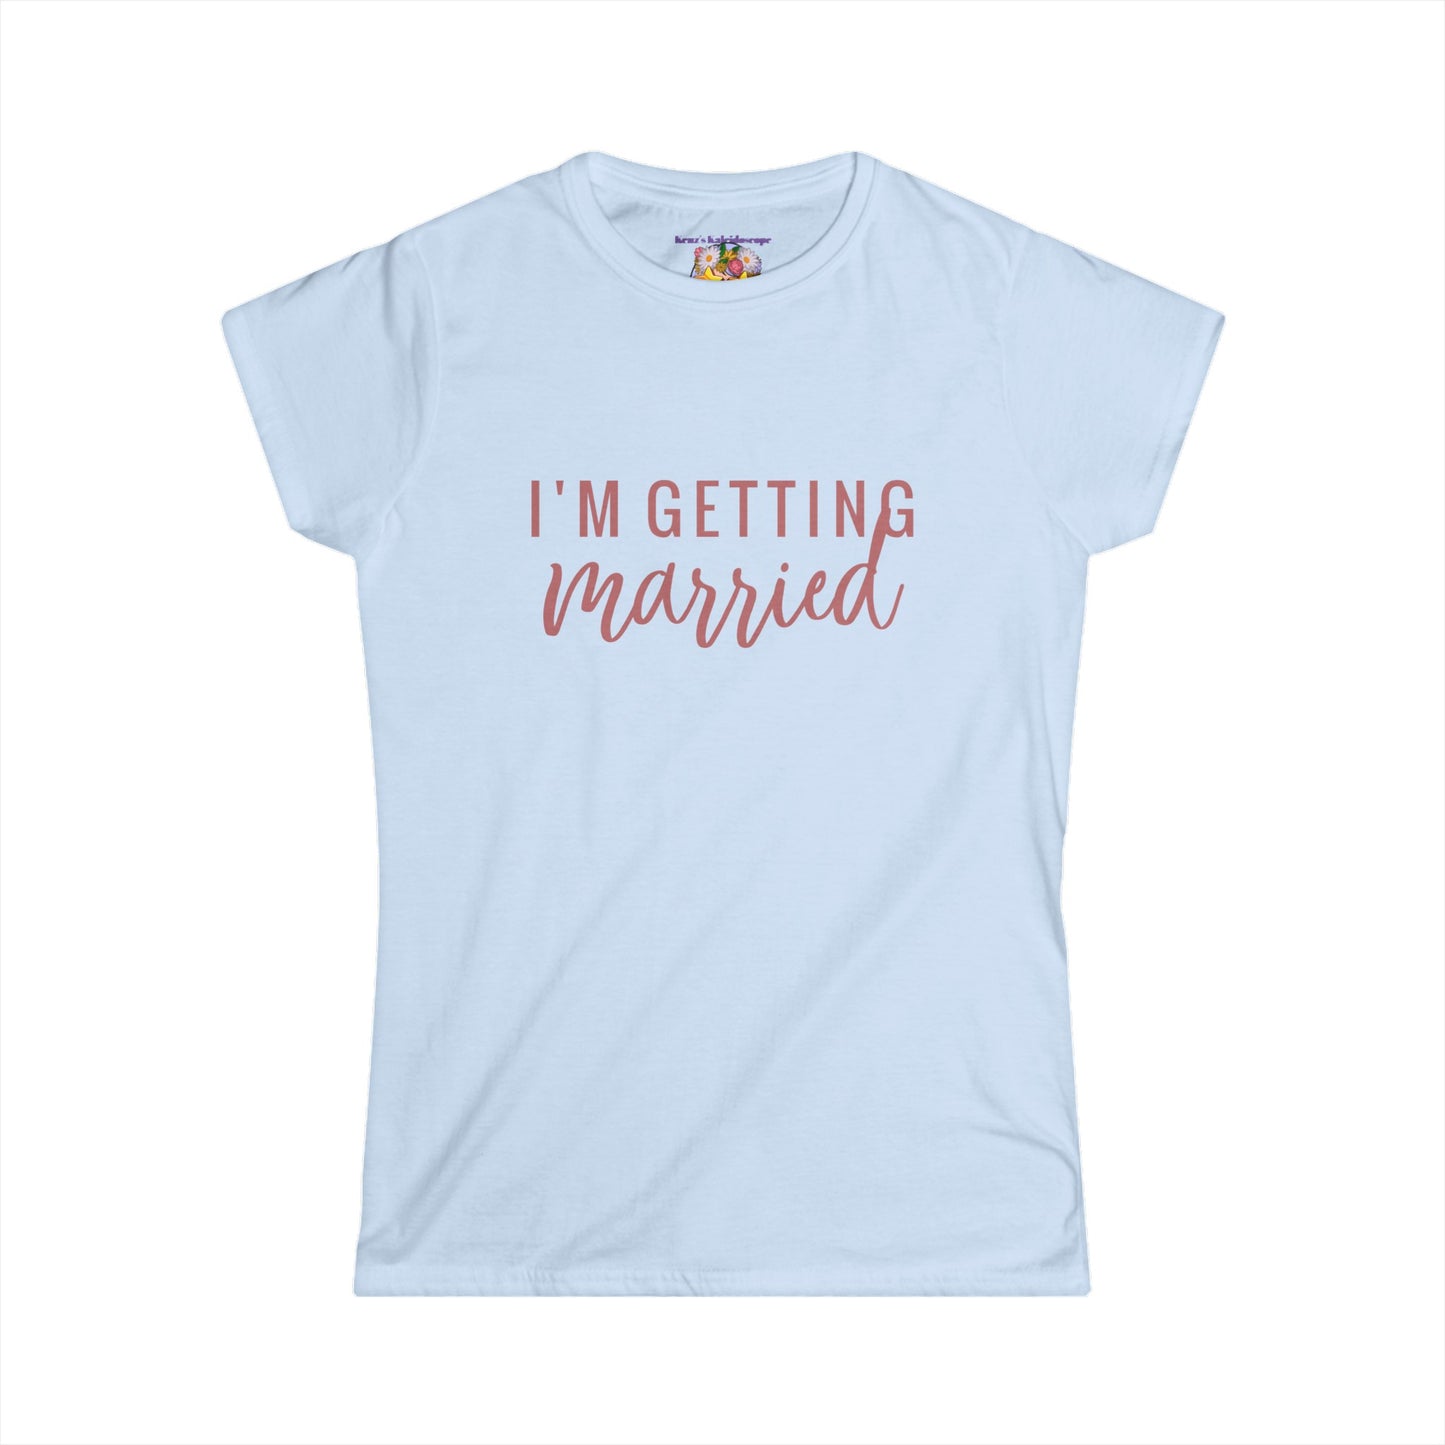 I'm Getting Married Bride, S-2XL, Women's Softstyle Tee